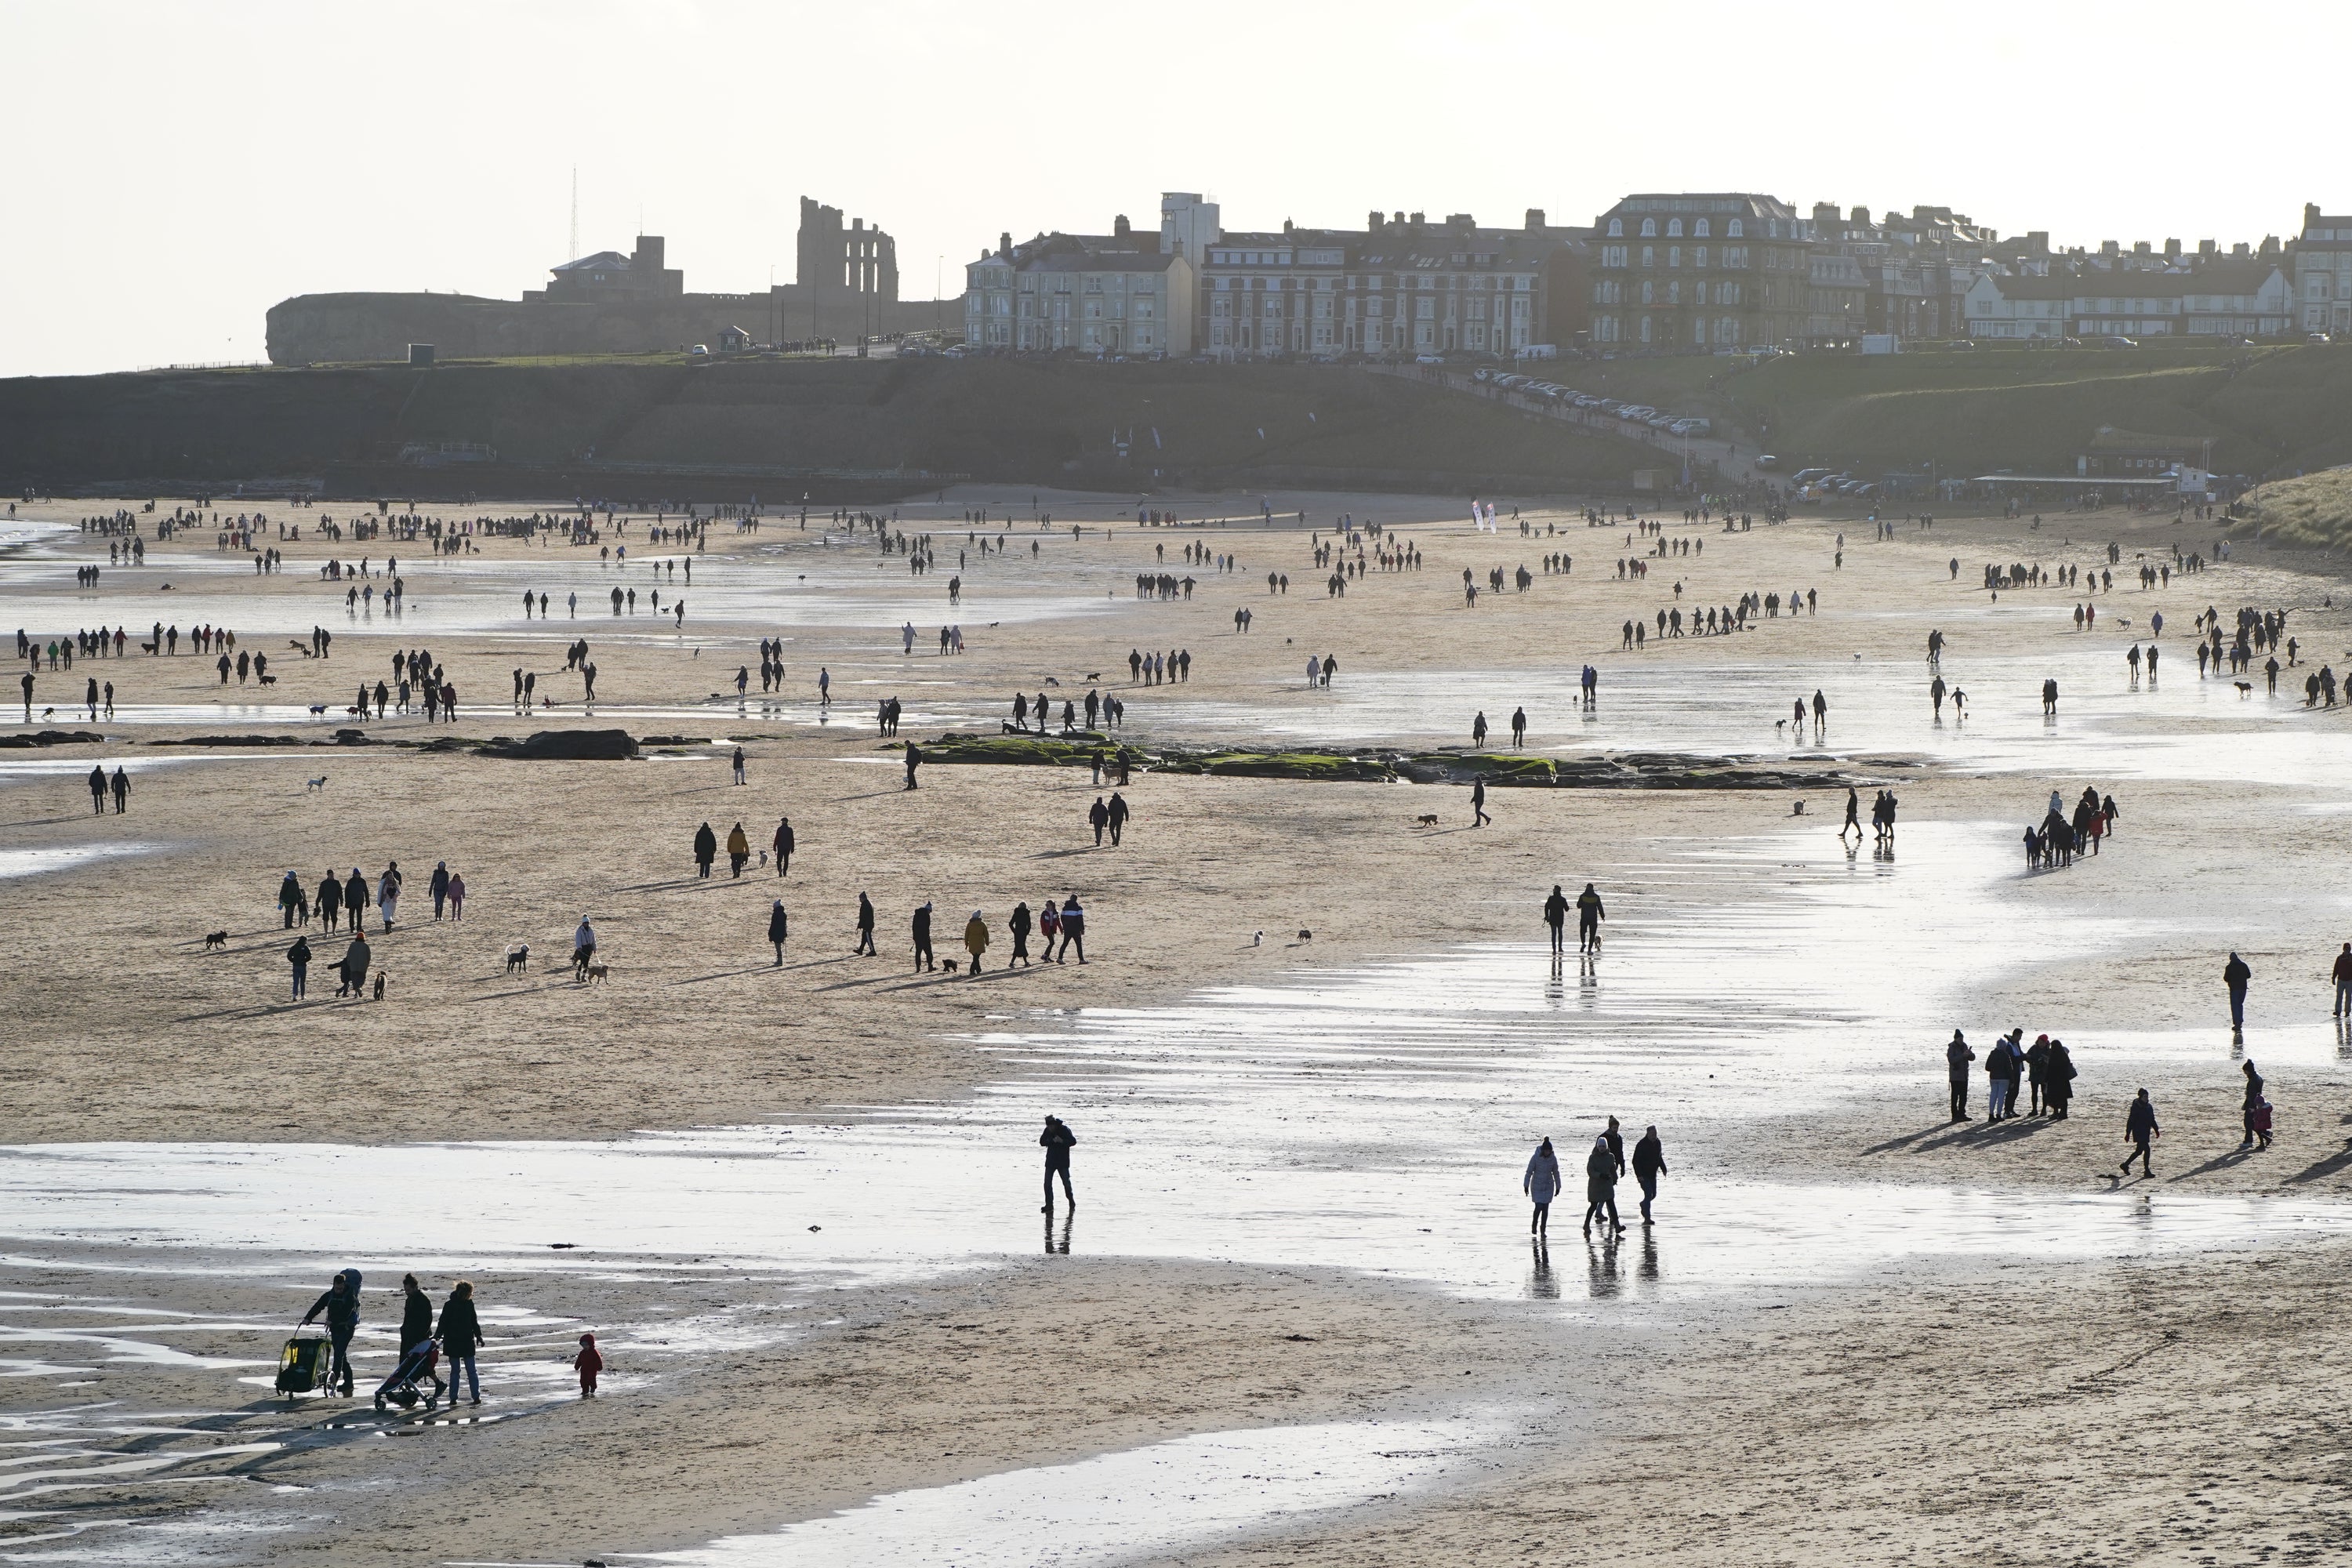 People walk along Tynemouth Longsands Beach in Tynemouth in the North East of England